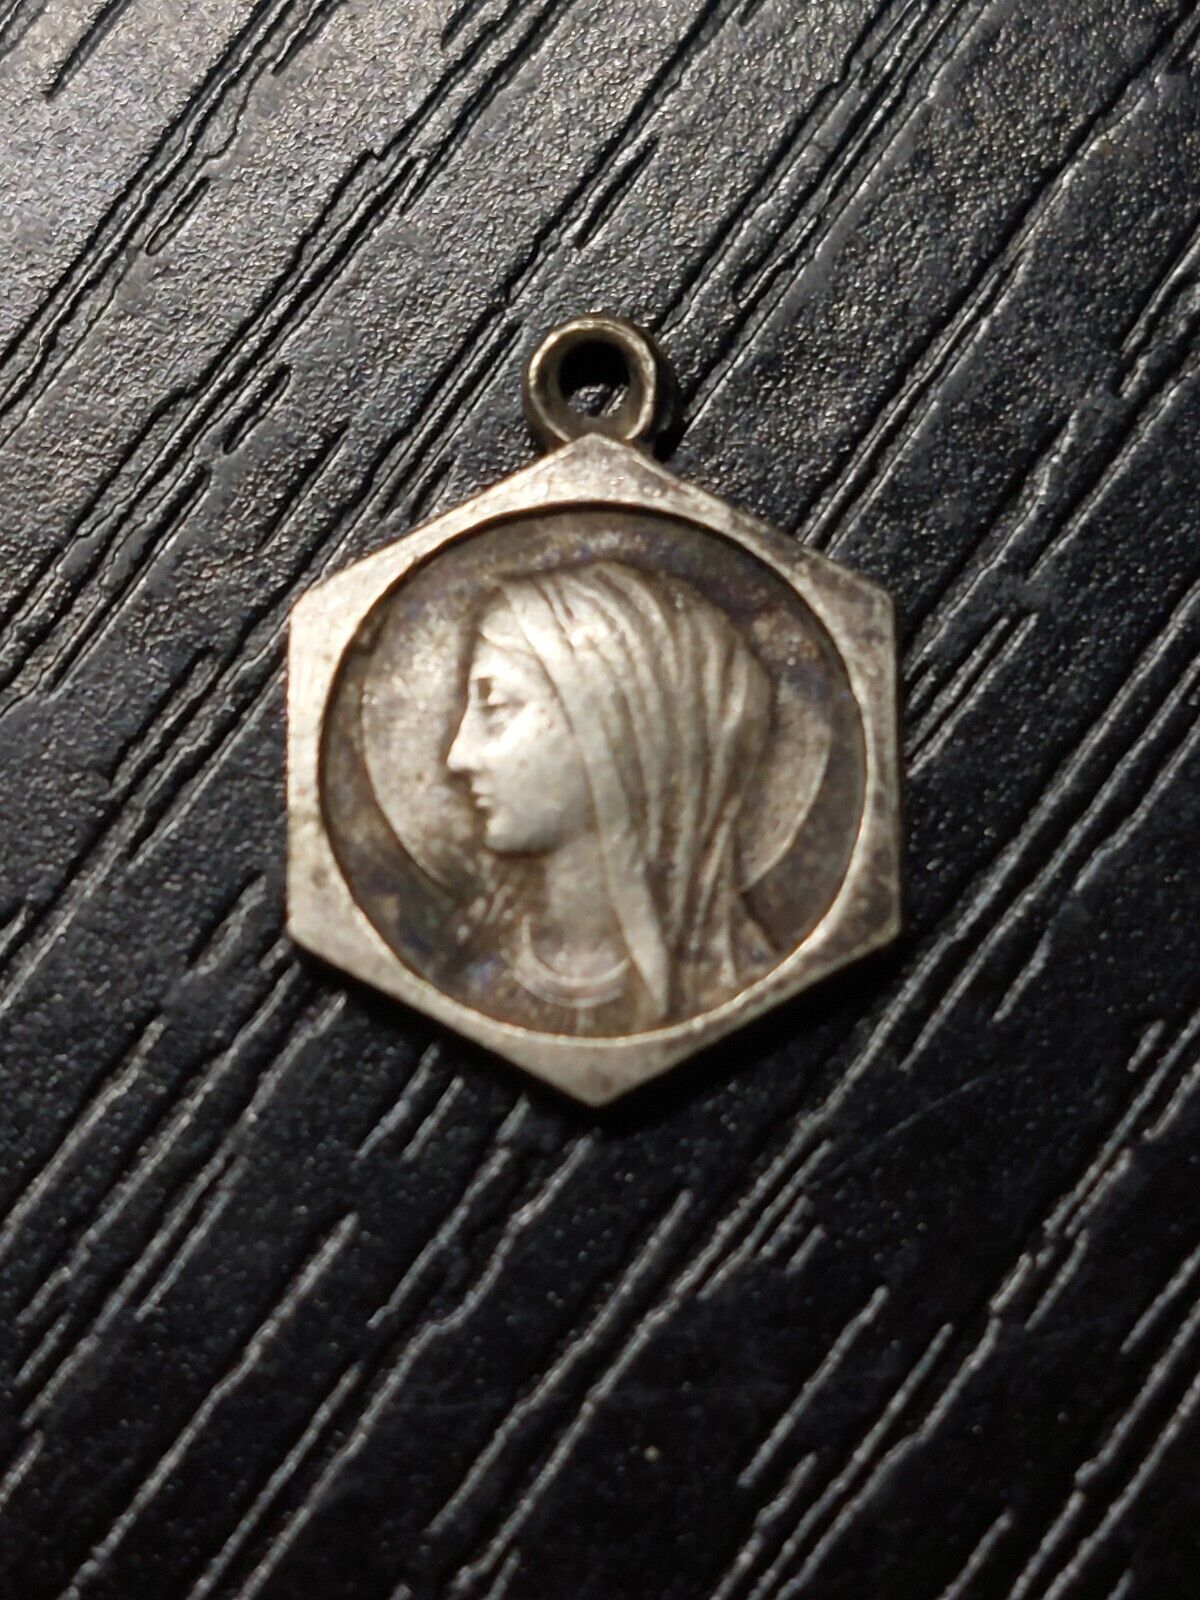 ANTIQUE FRANCE OUR LADY OF LOURDES HOLY PROTECTION AGAINST EVIL MEDAL PENDANT